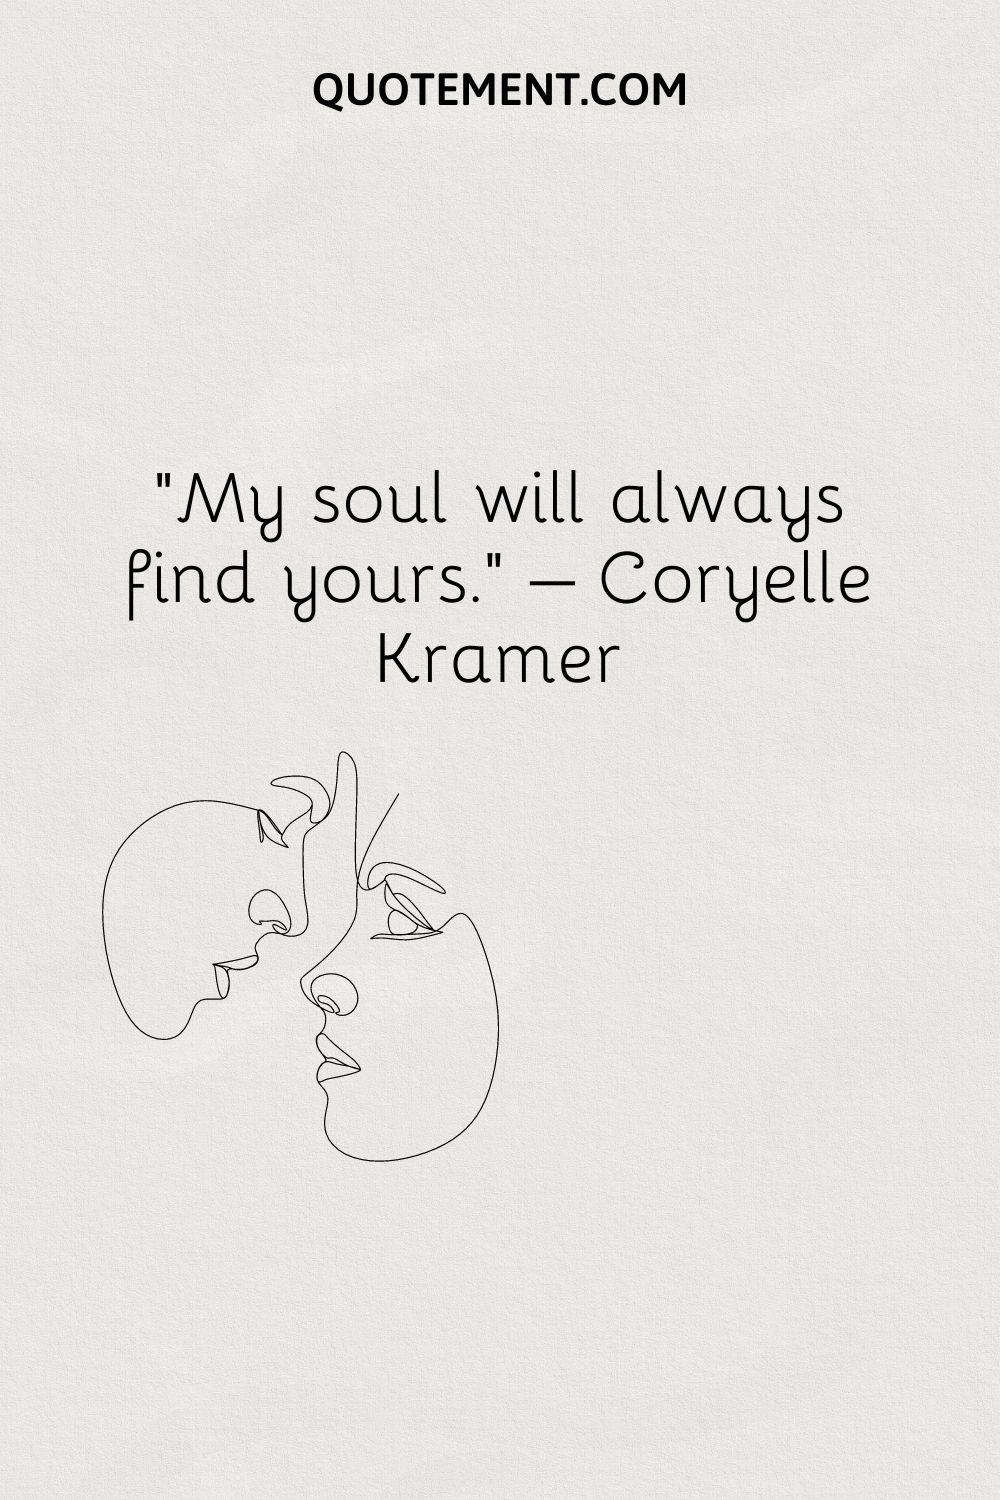 My soul will always find yours